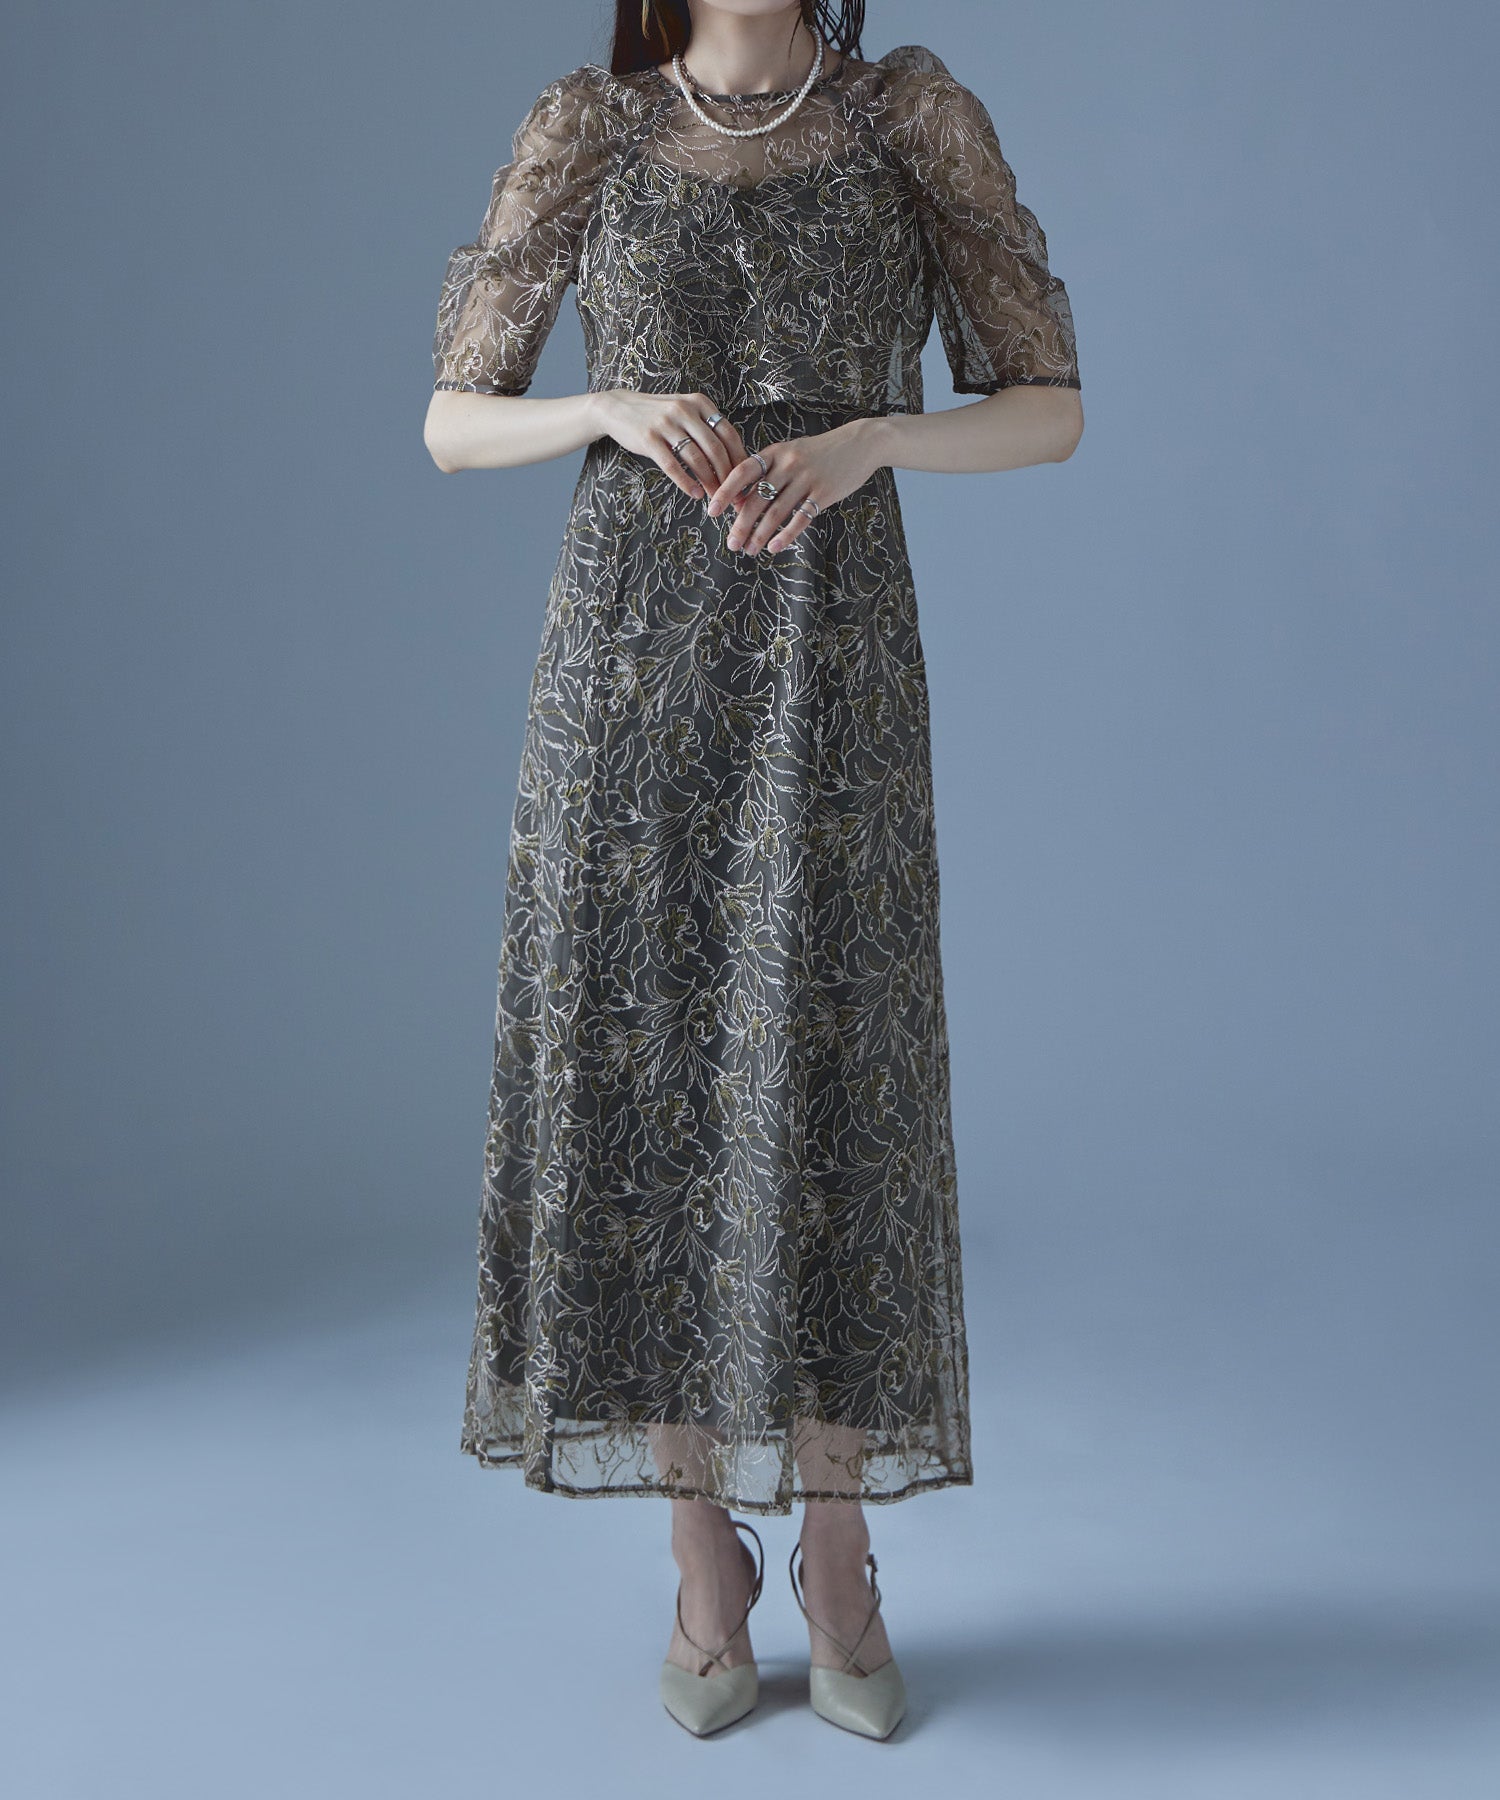 Embroidered lace layered dress